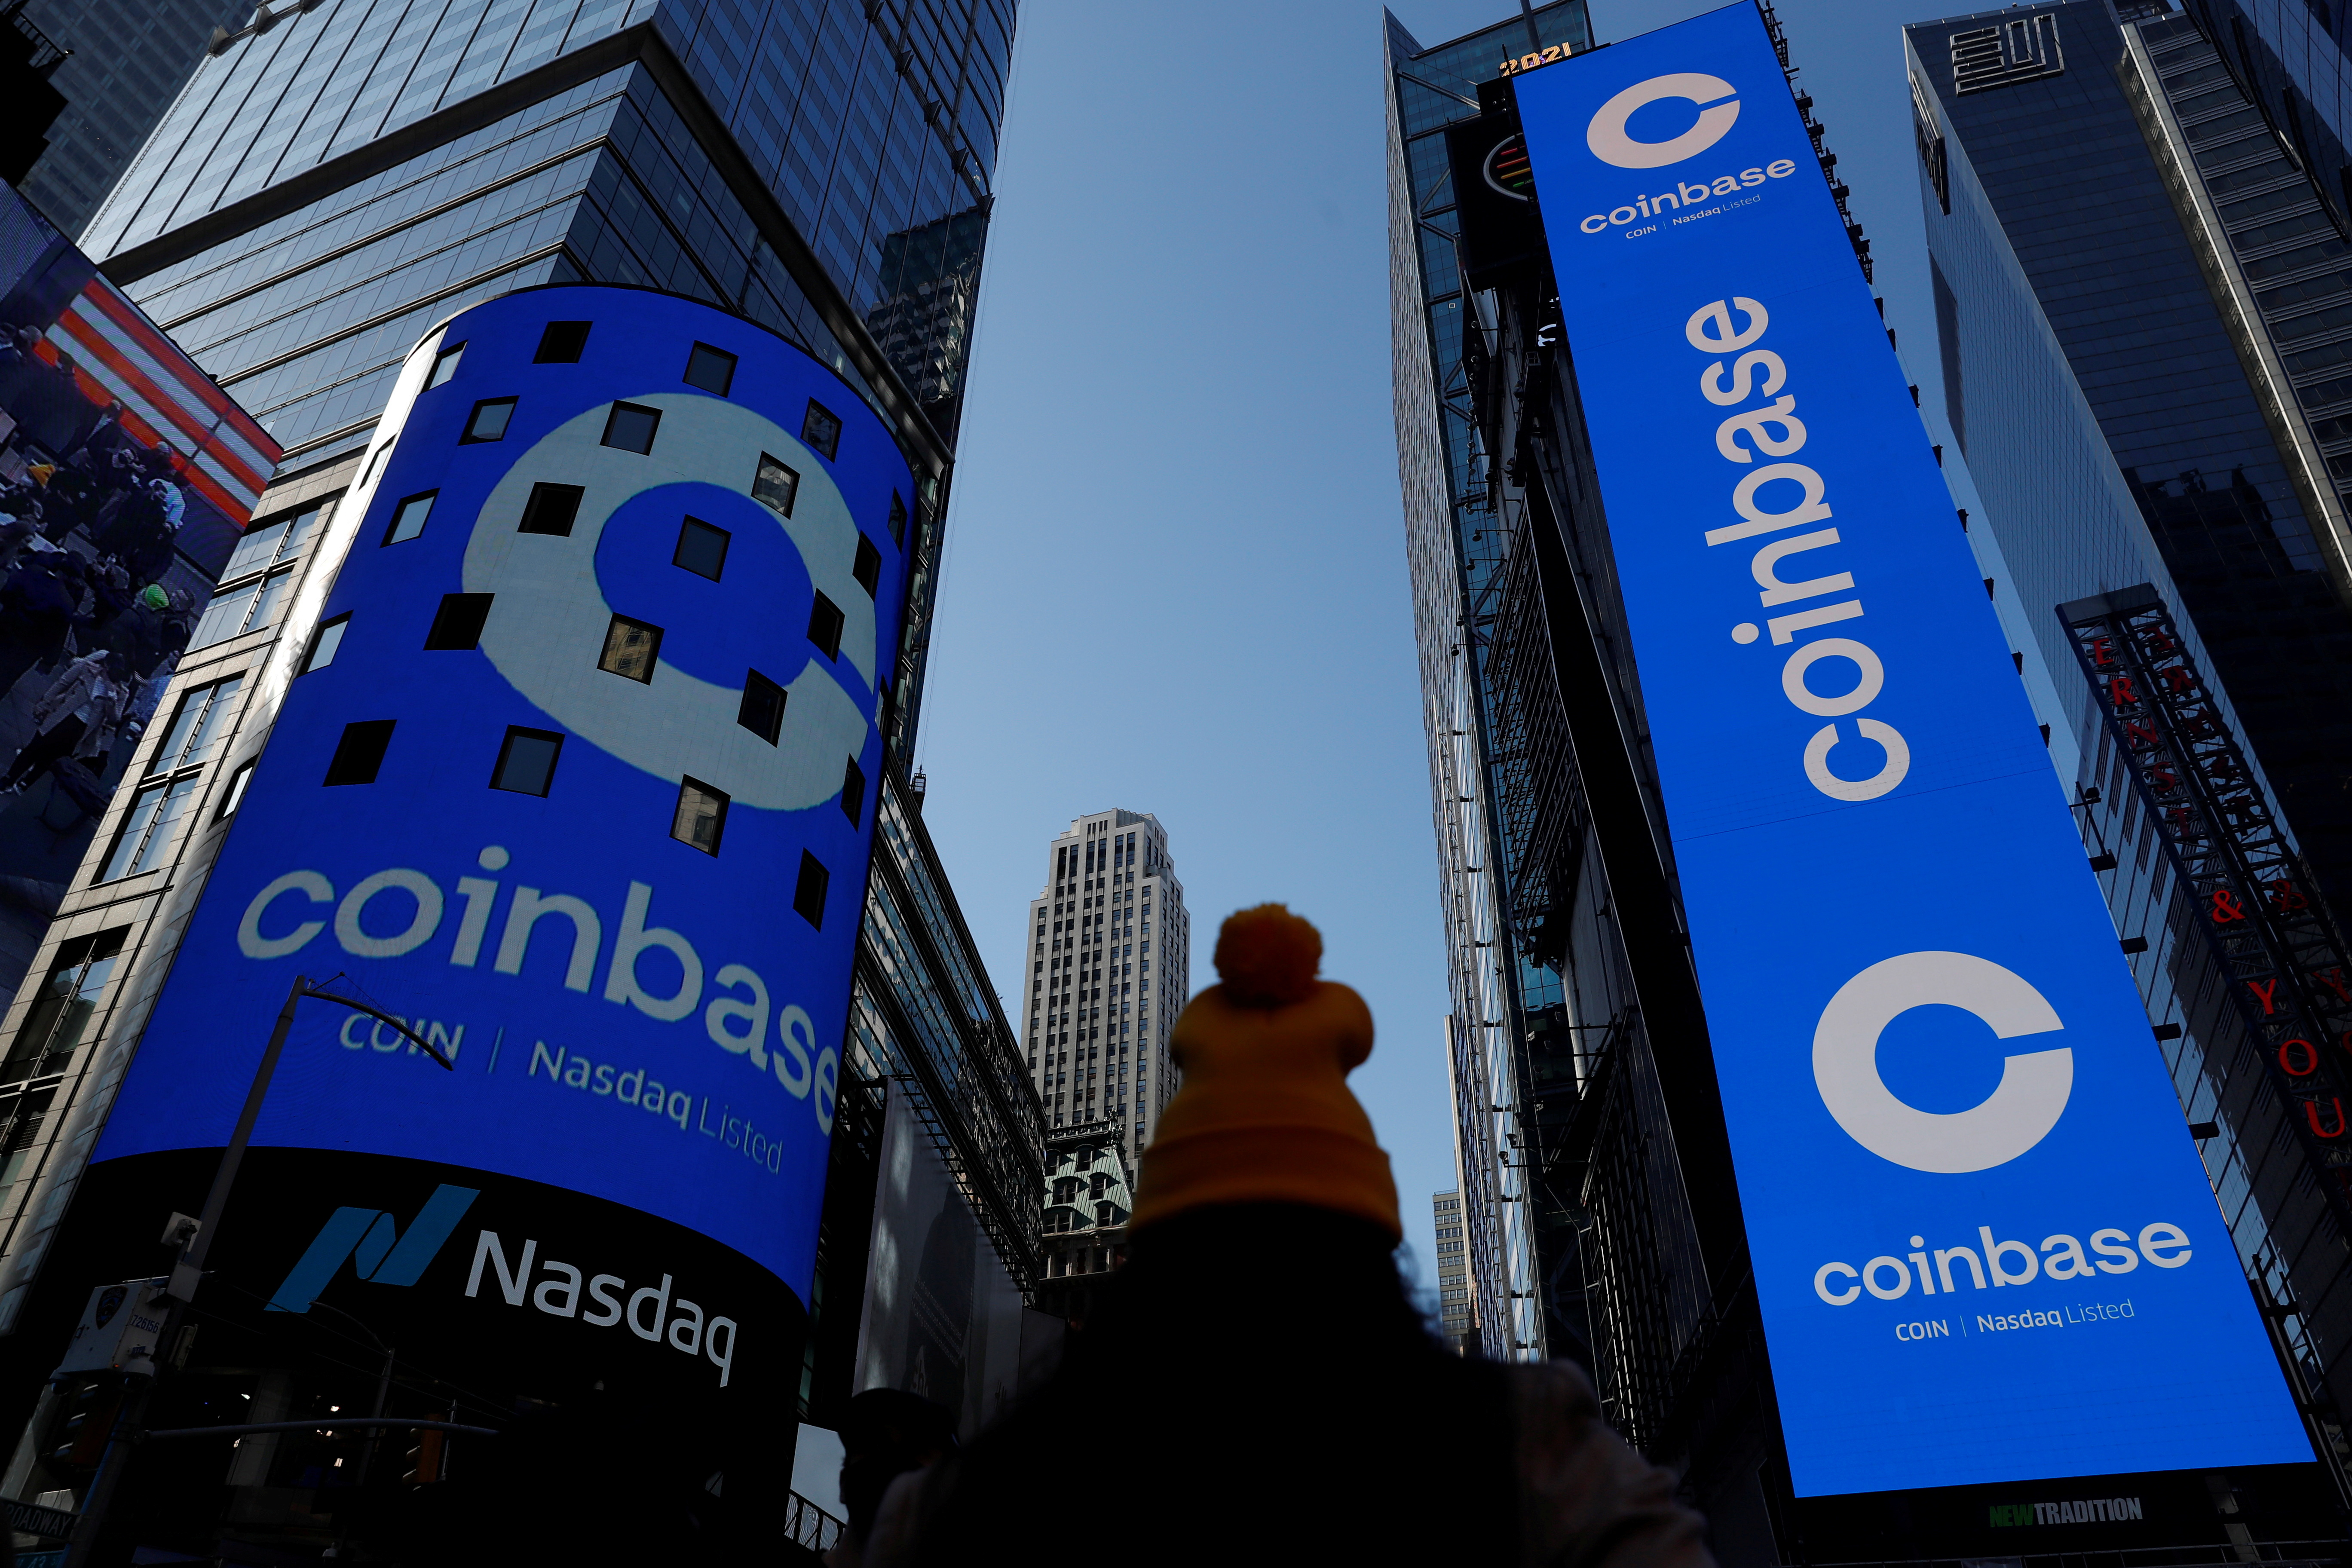 Crypto's Coinbase Tells User Missing $96, After Breach Is His Problem - Bloomberg